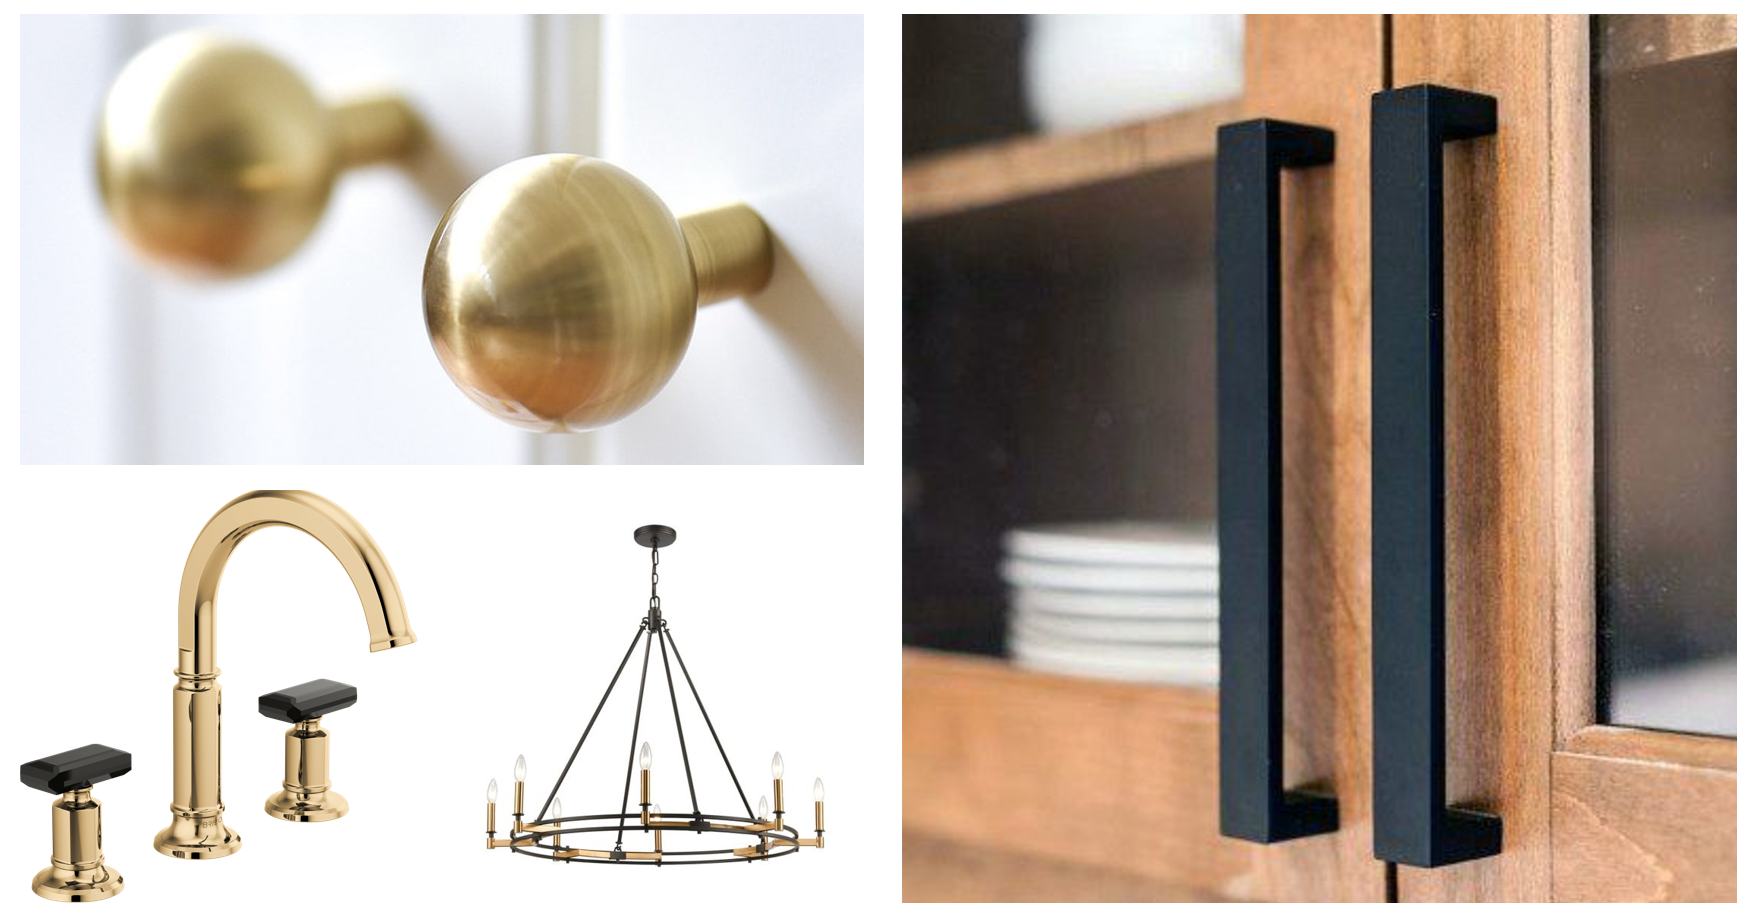 Home fixtures with mixed metals - matte black and gold.